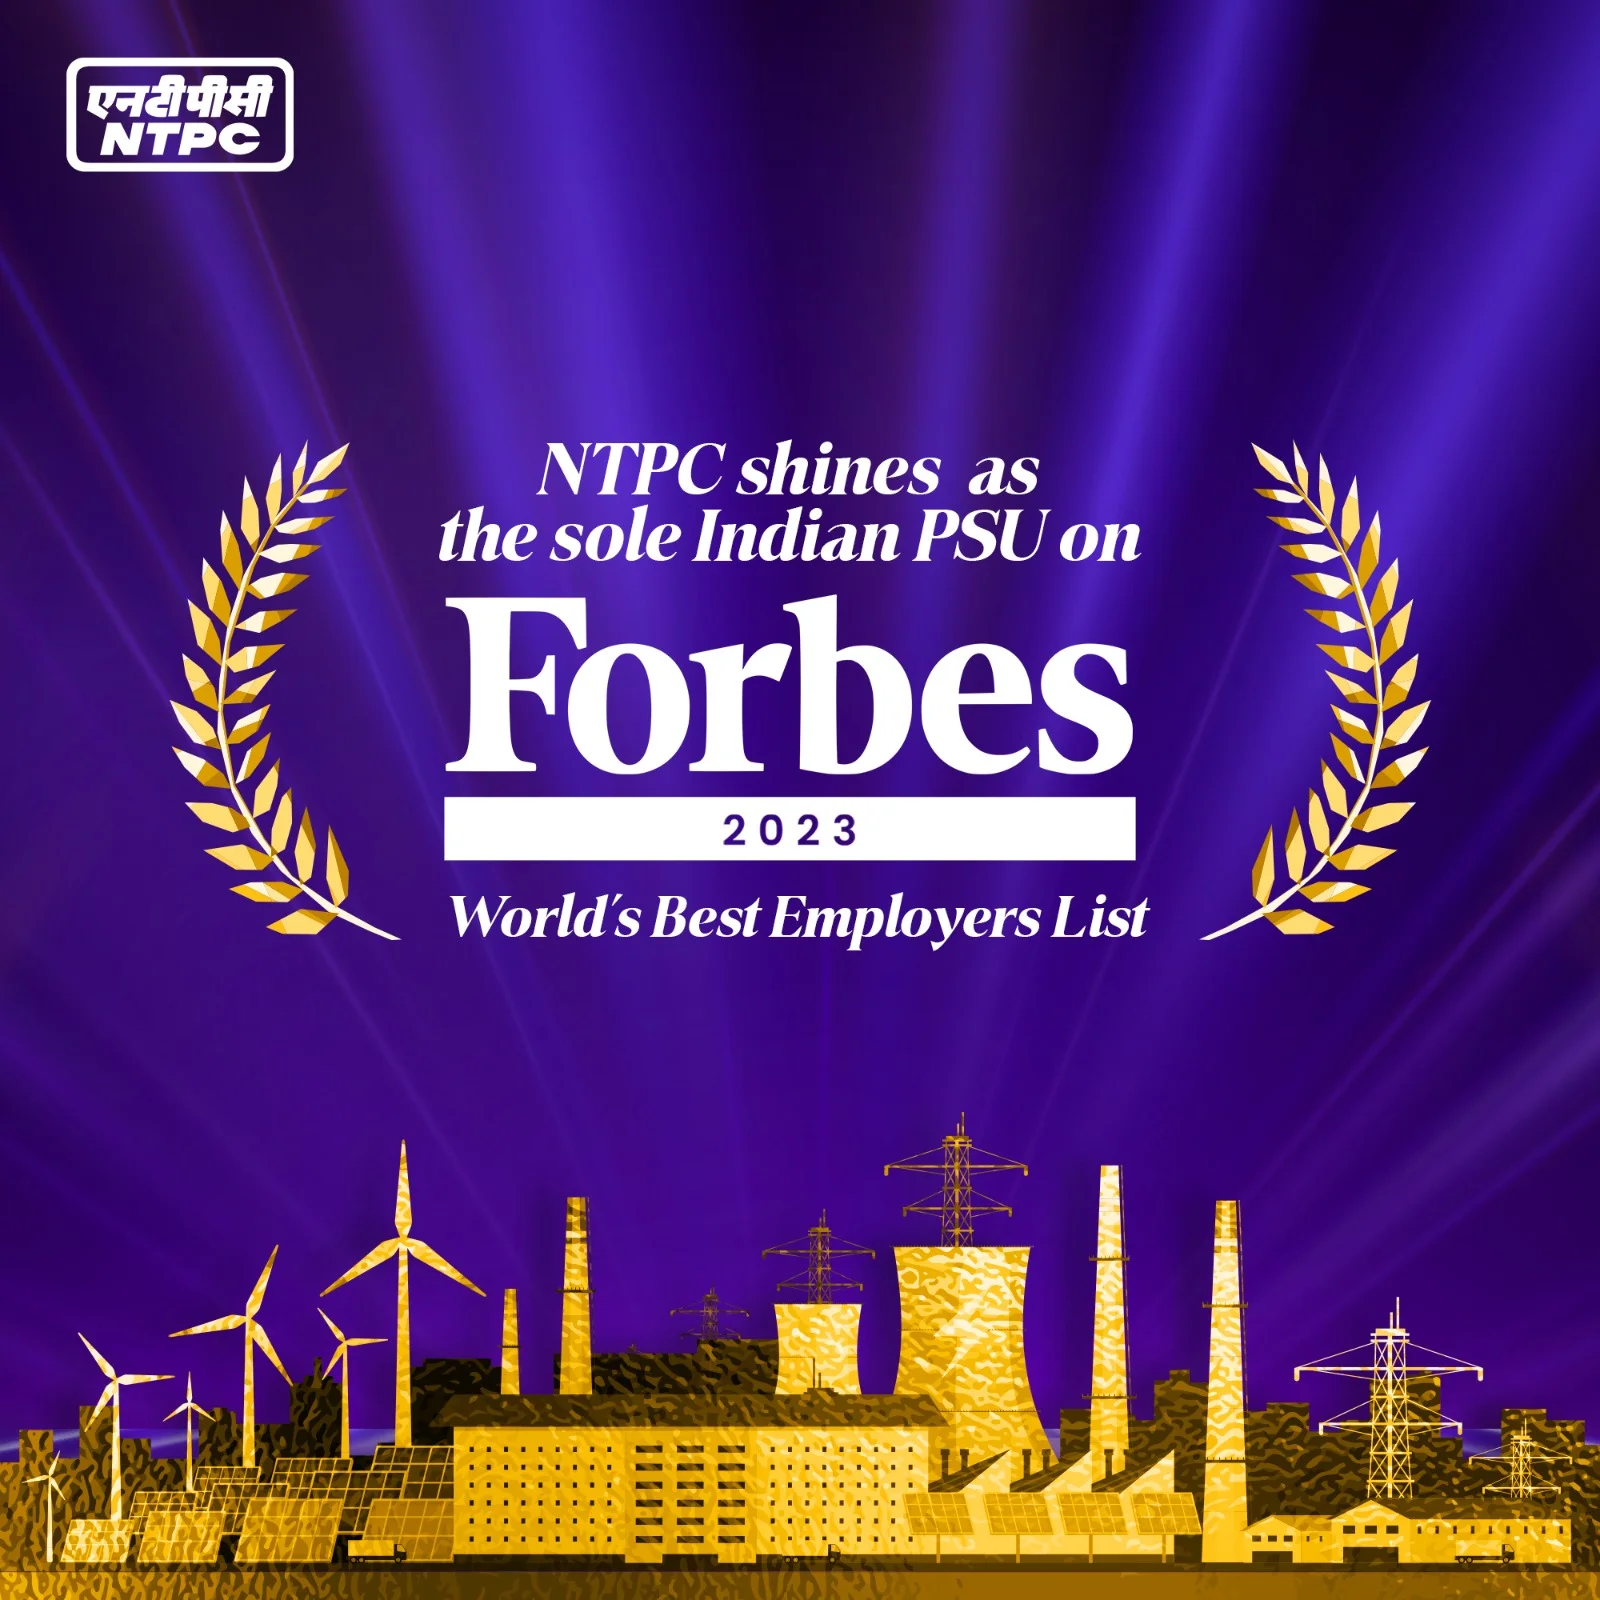 NTPC Shines as the Only Indian PSU to Feature in Forbes “World’s Best Employers 2023” List